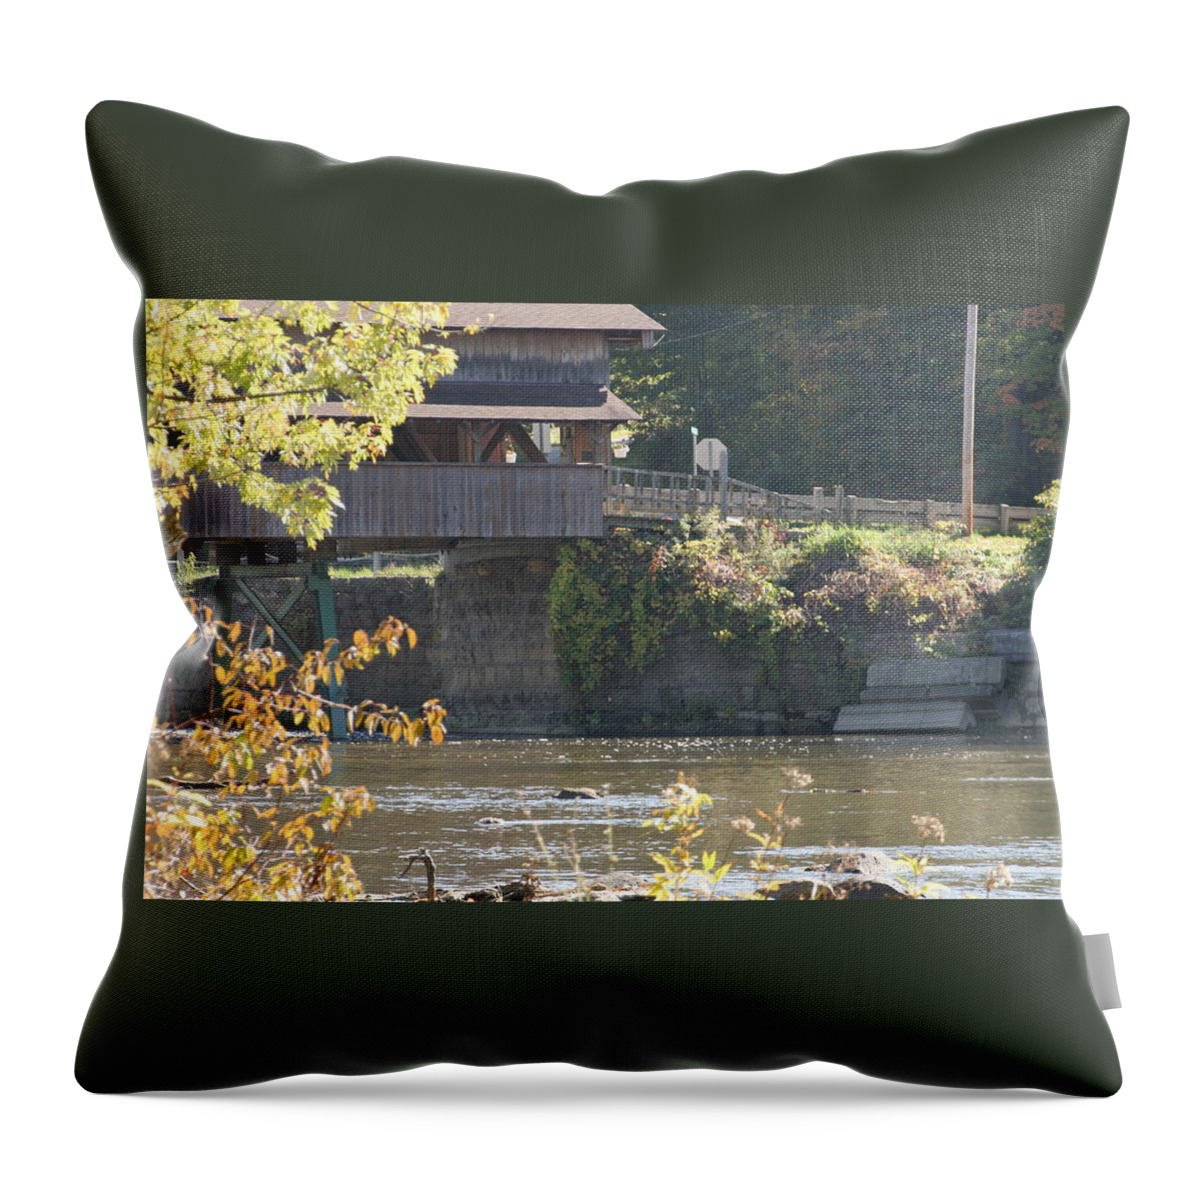 Covered Bridge Throw Pillow featuring the photograph Harpersfield Covered Bridge by Valerie Collins